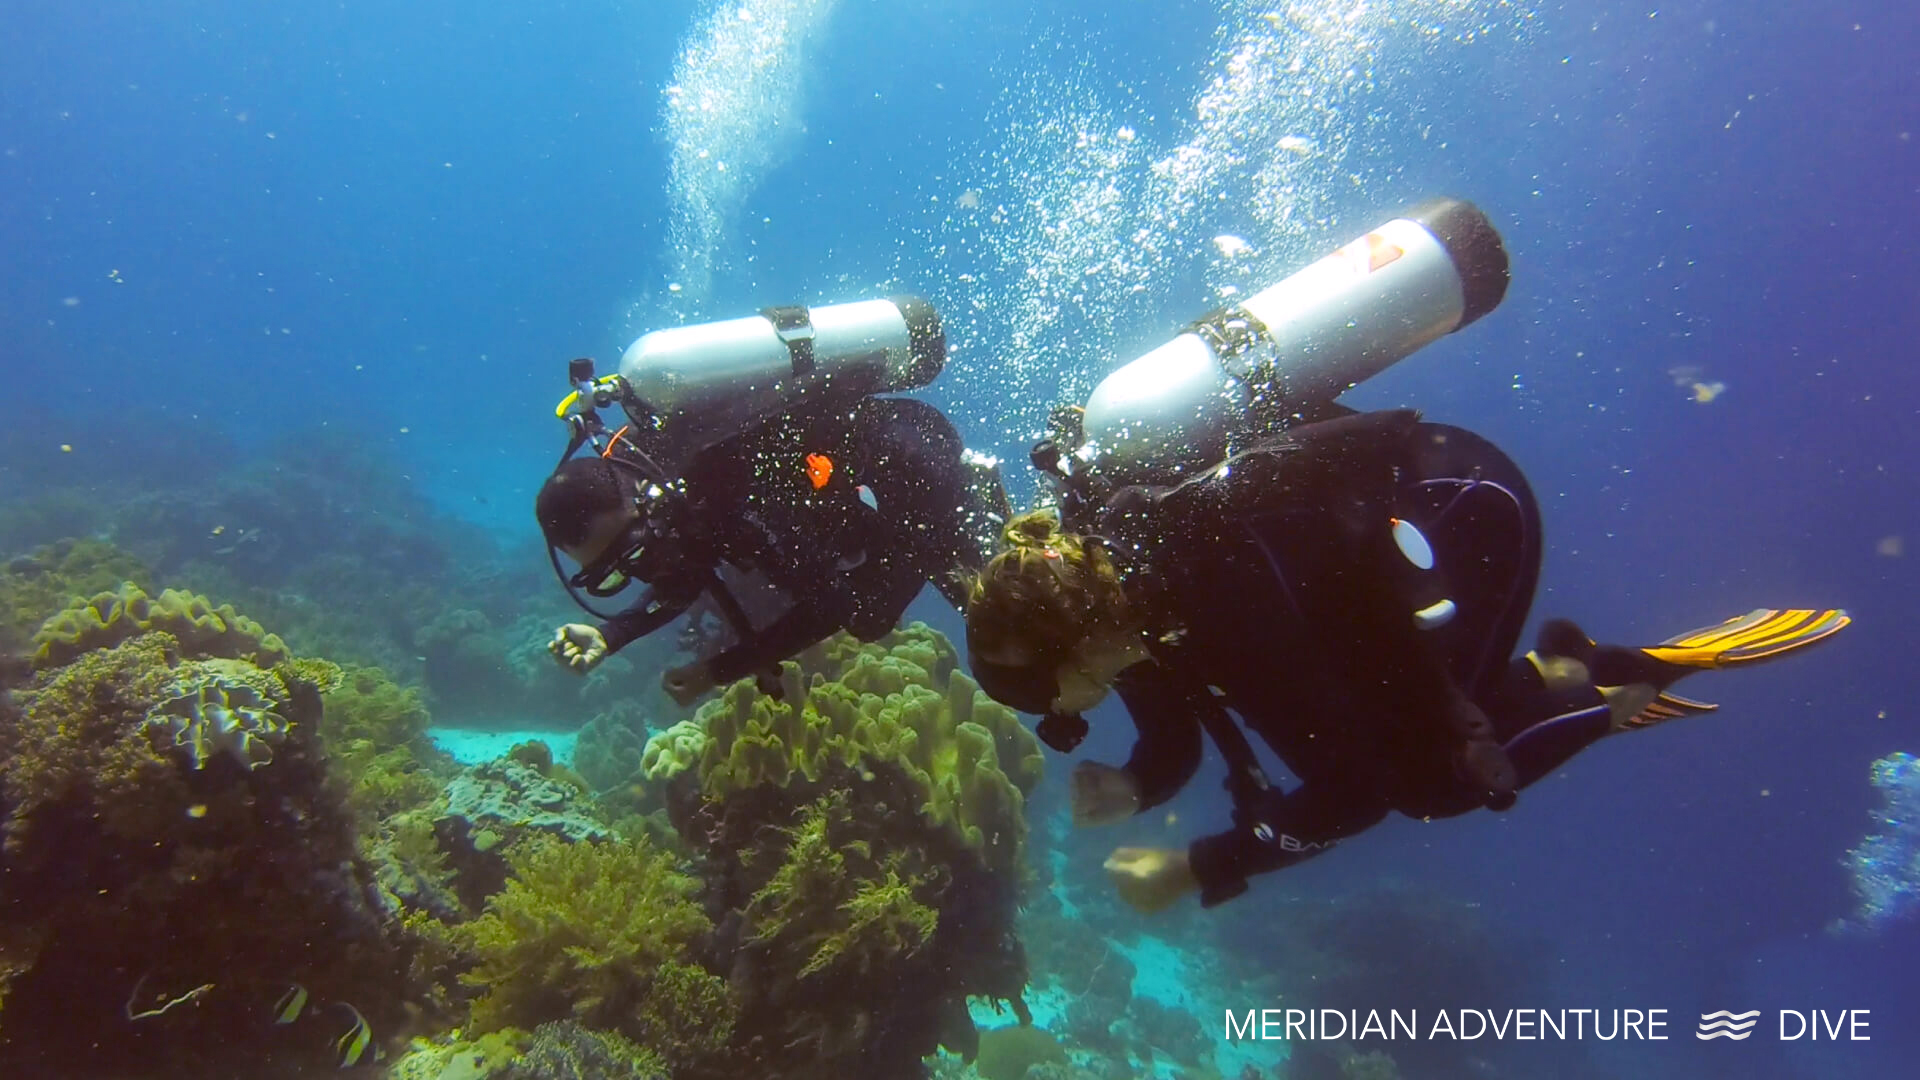 Meridian Adventure Dive - The Shimmy.